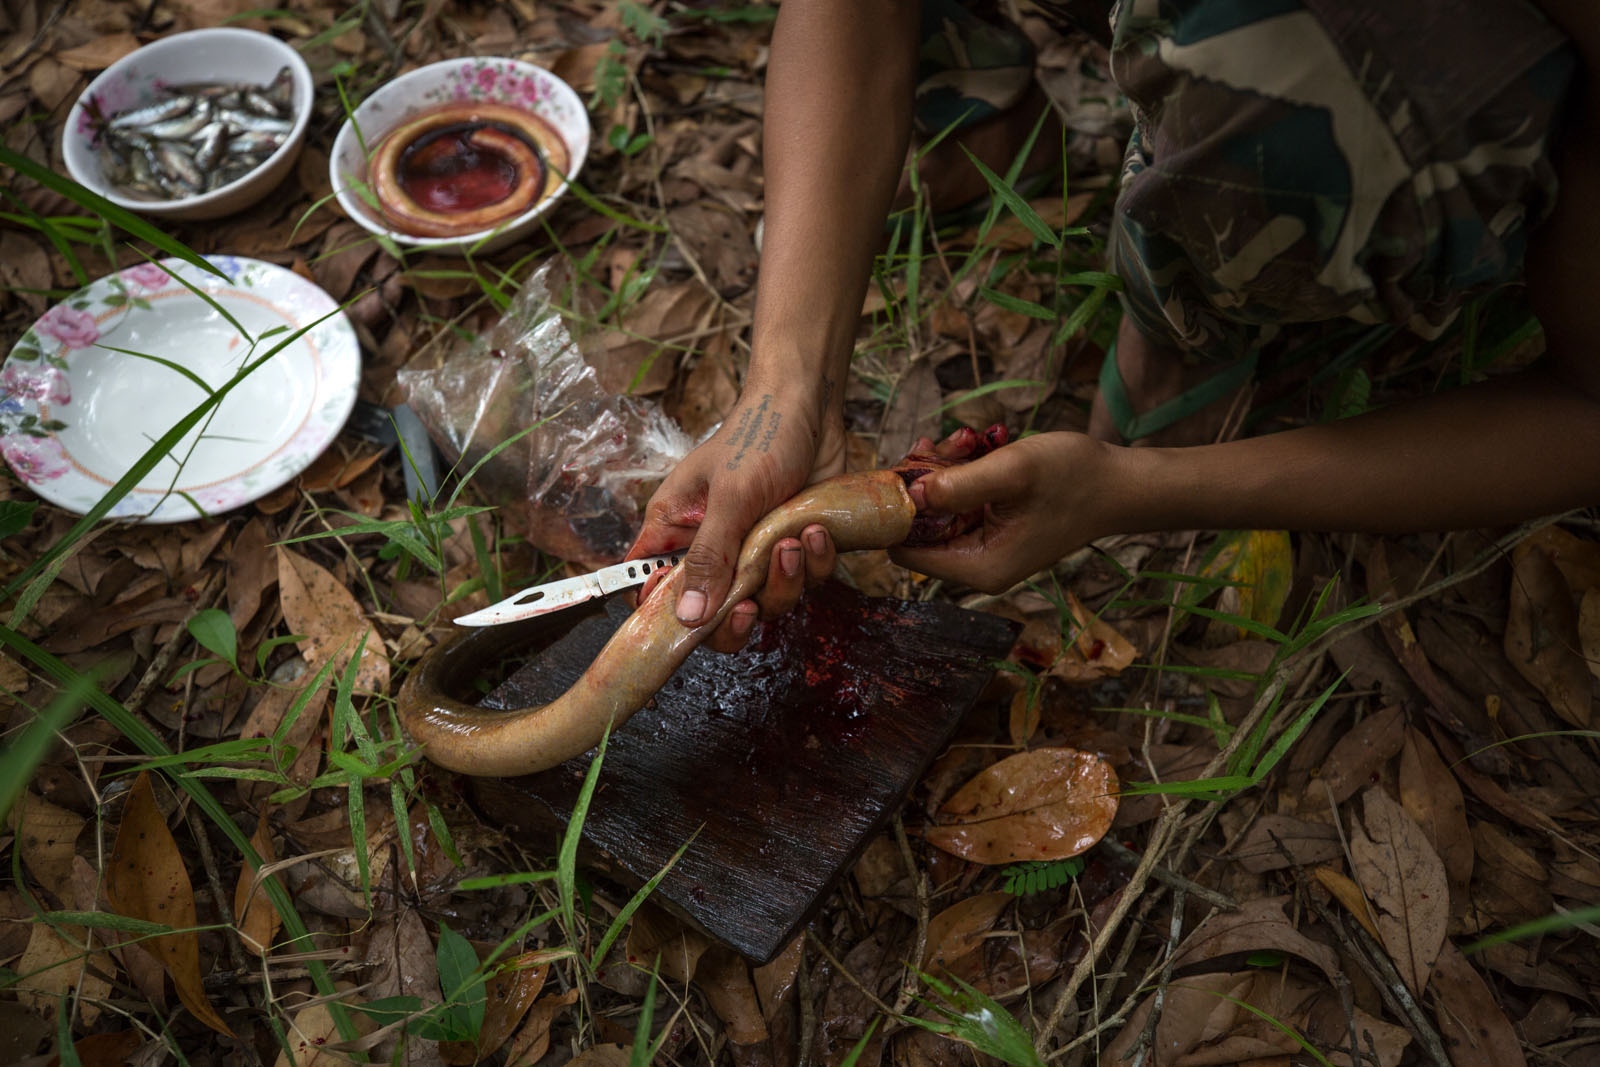 PROTECTING THAILANDS ROSEWOOD - A forest ranger guts an eel caught by the rangers in a...